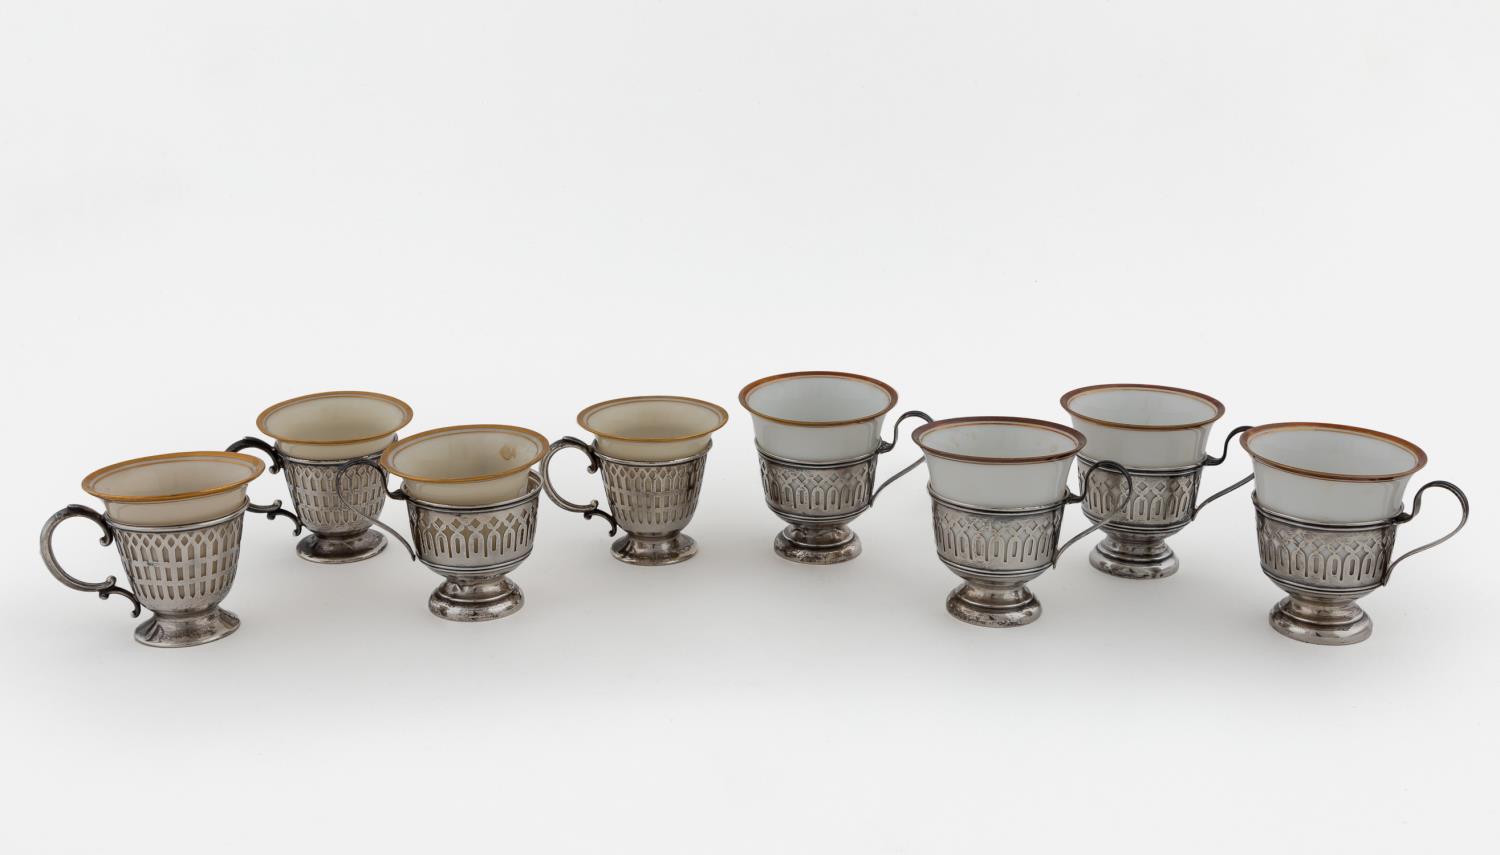 8 STERLING DEMITASSE CUPS WITH PORCELAIN